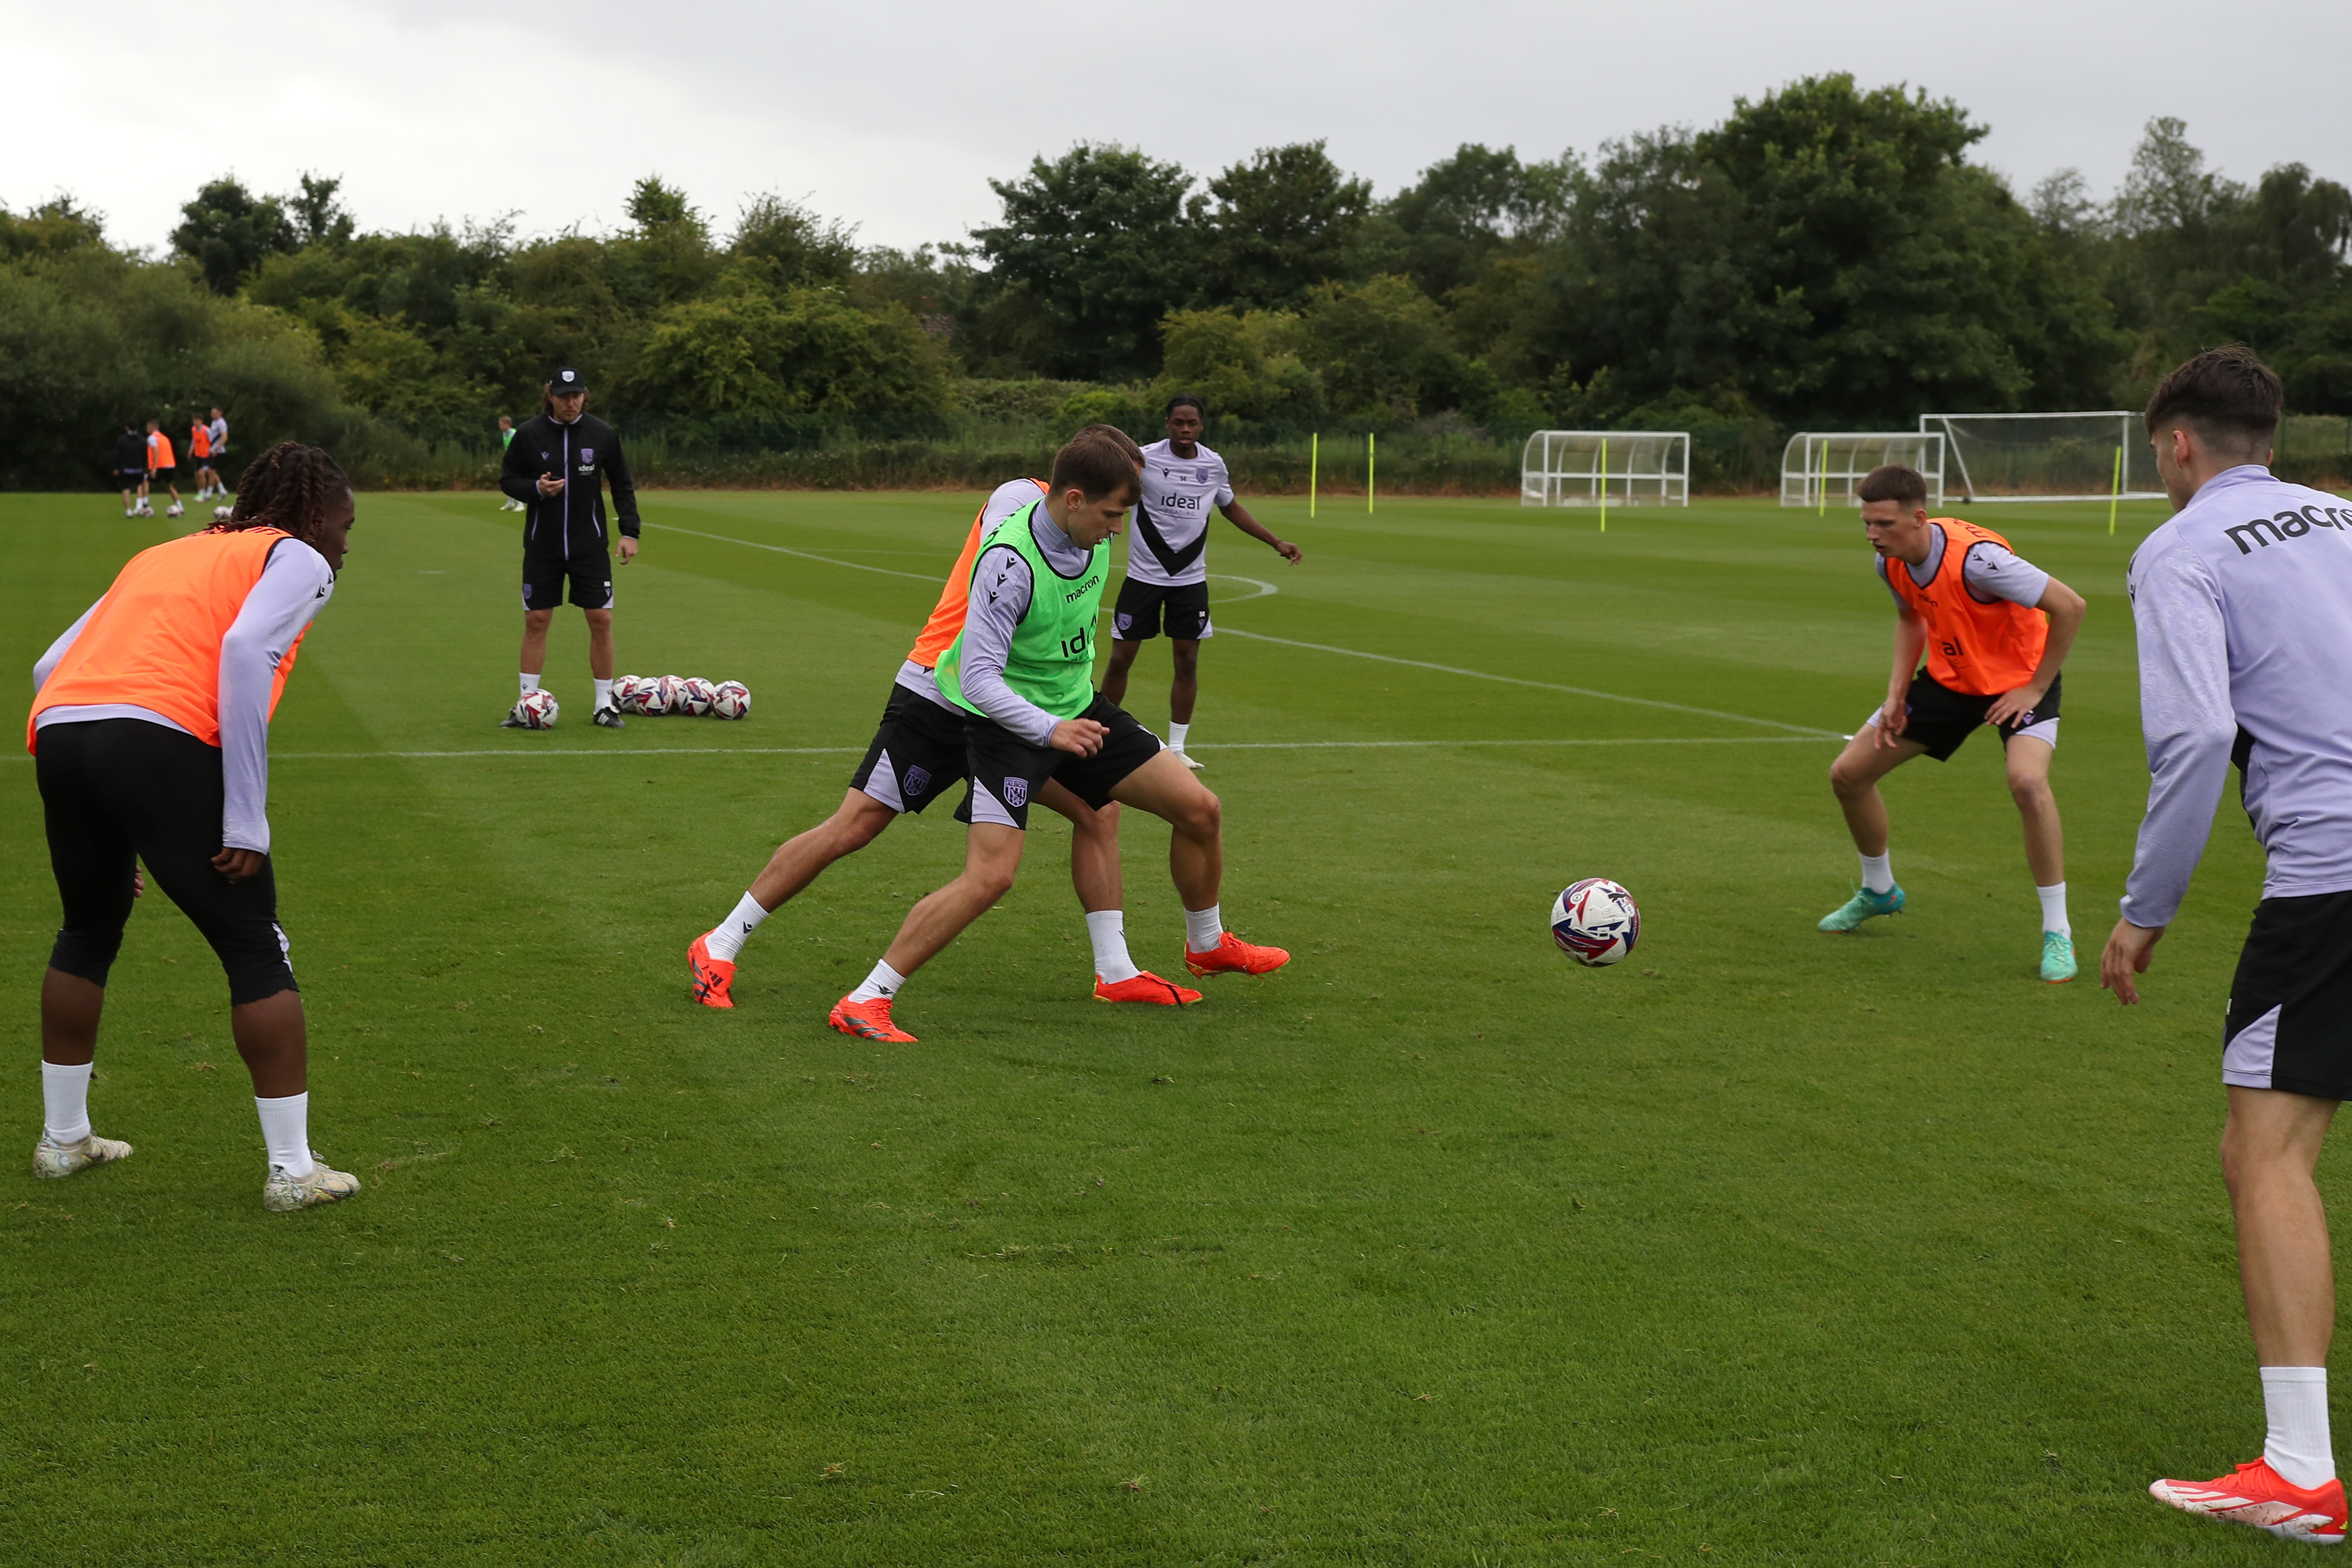 General action of a training session involving several players 